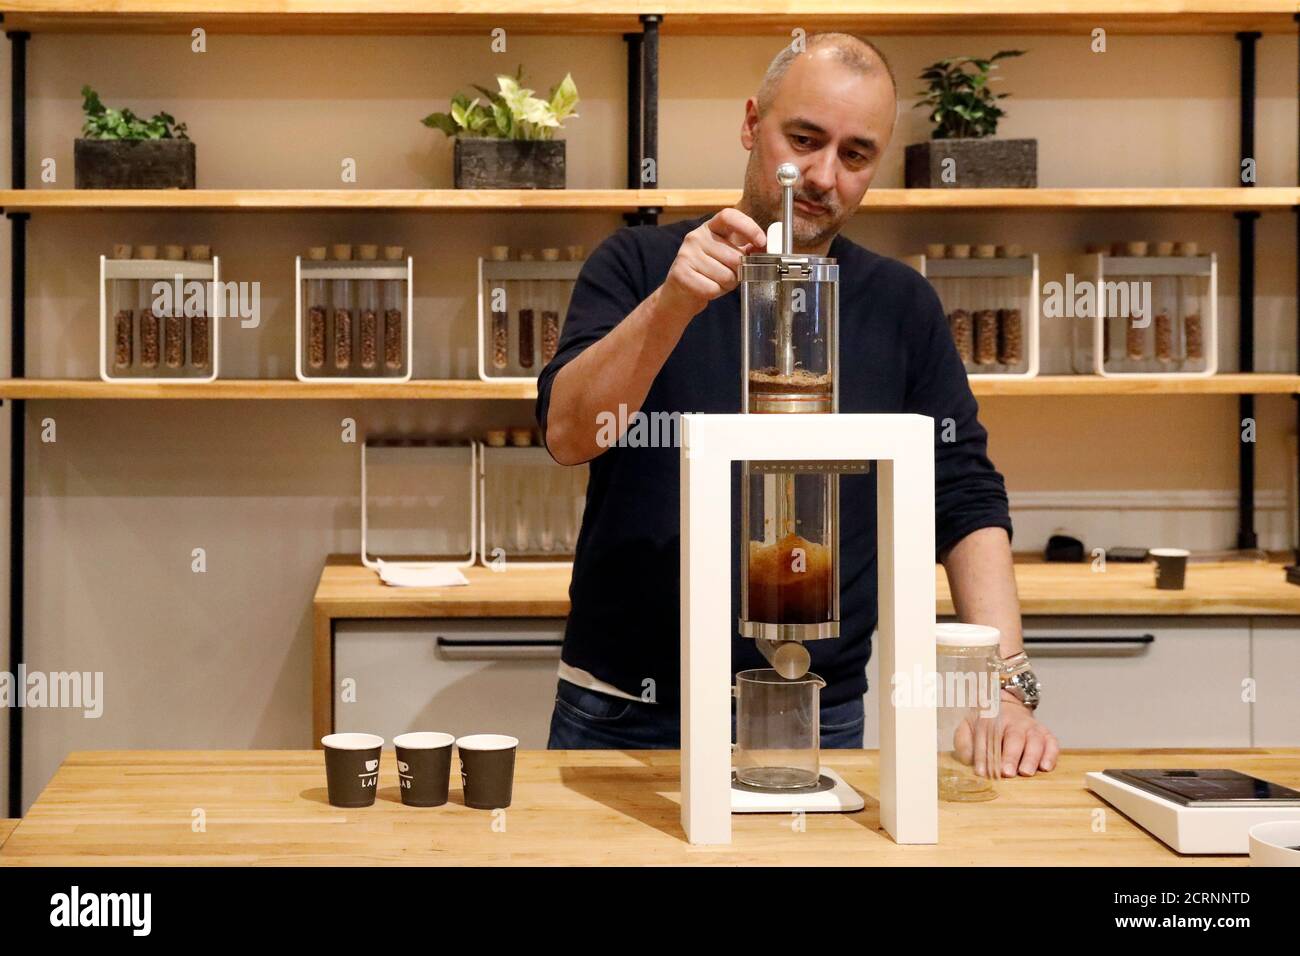 Alpha Dominche Chief Executive Officer Thomas Perez brews a serving of Kenyan Geisha coffee, which retails at $18 per cup, at his company's Extraction Lab in Brooklyn, New York, U.S., February 17, 2017. REUTERS/Brendan McDermid Stock Photo